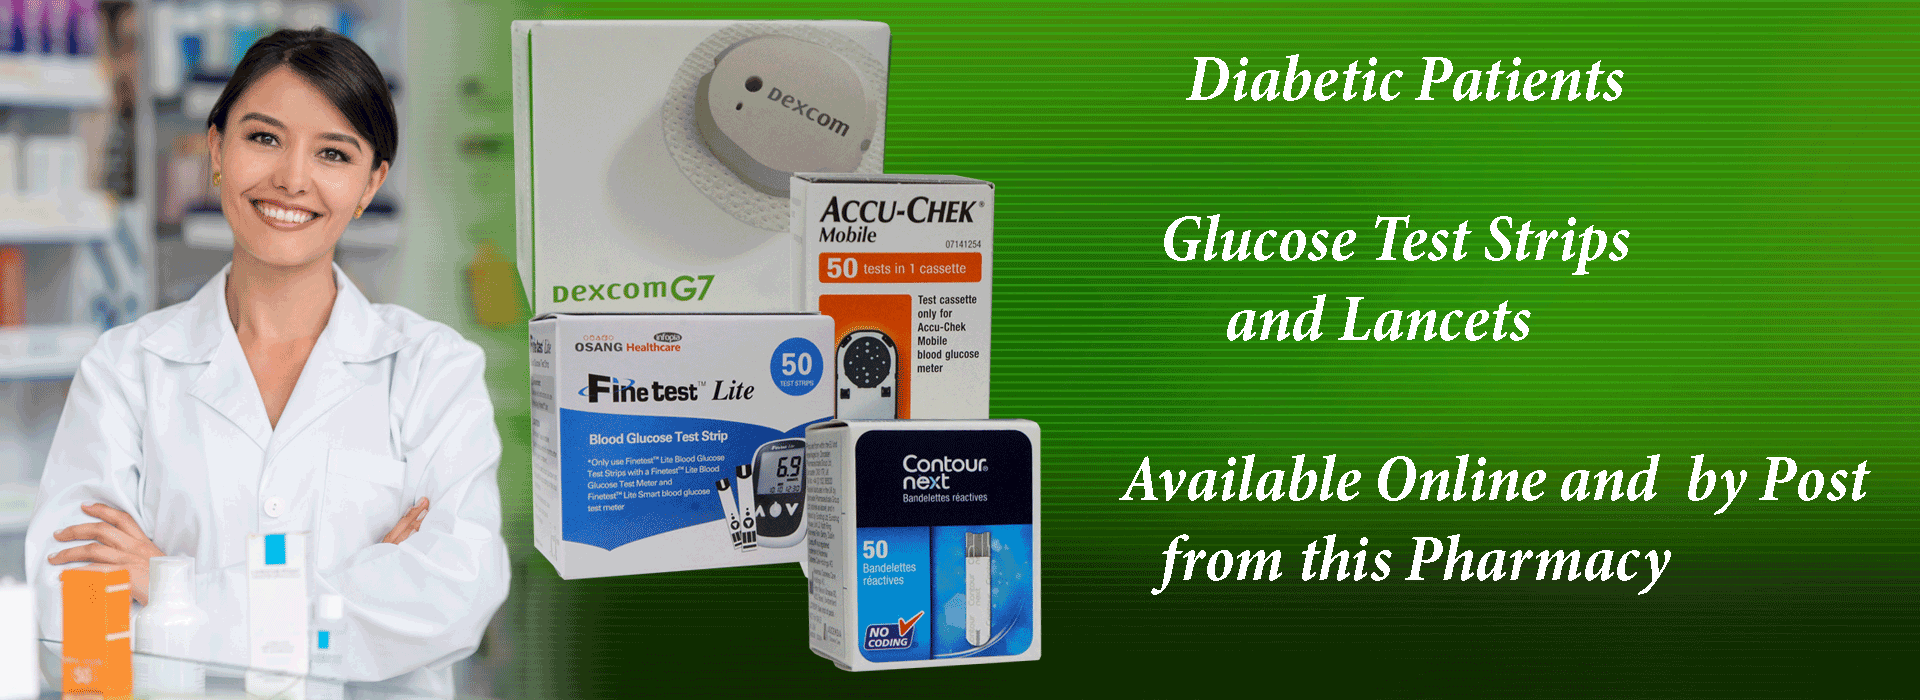 Diabetes Test Strips and Lancets available online and by post from this pharmacy